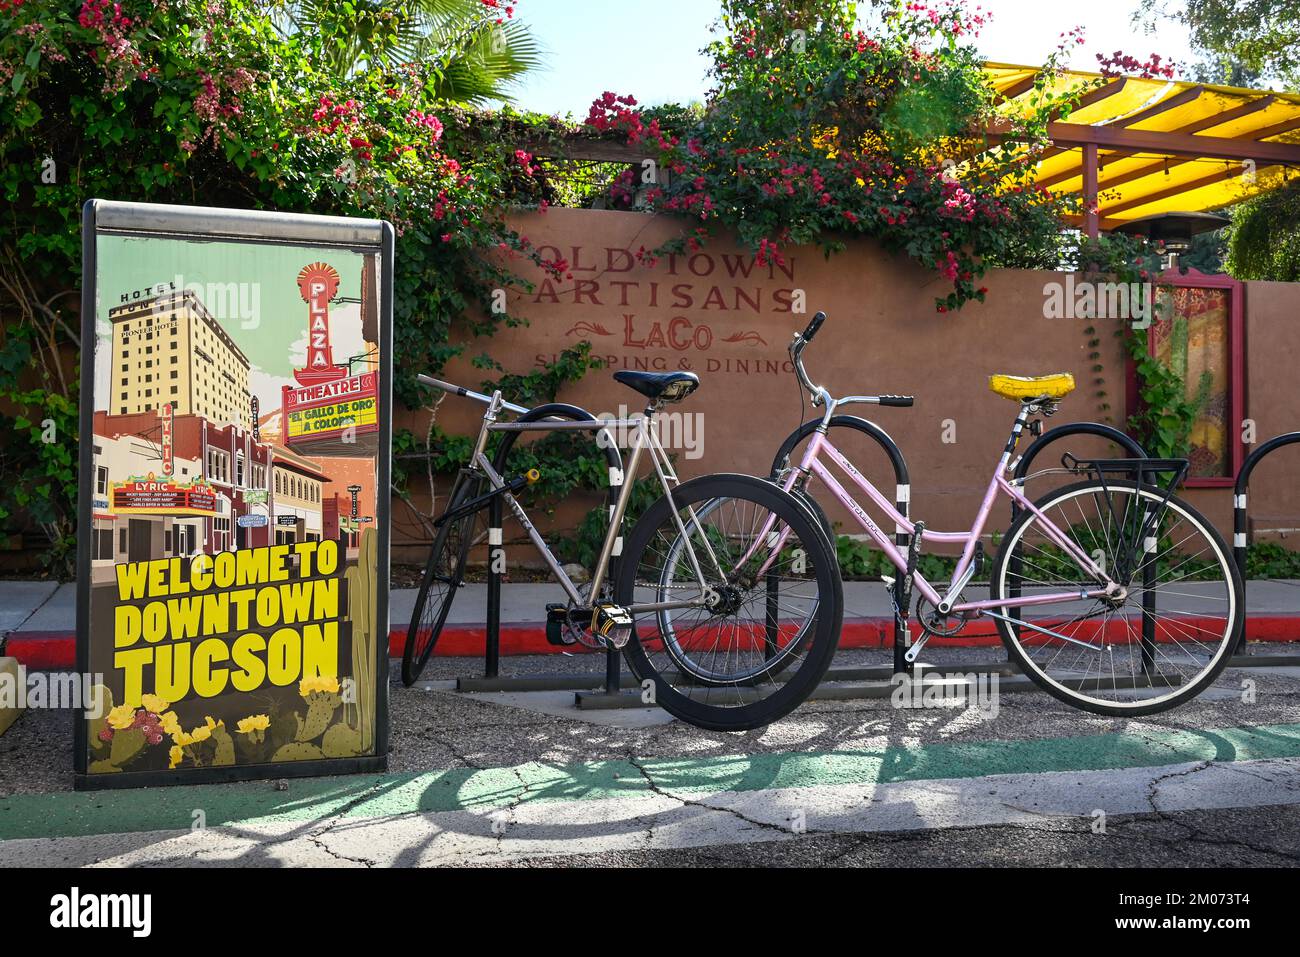 Entrance to the historic Old Town Artisans Block, located at the site of El Presidio San Augustin del Tucson, with signage and bicycles Stock Photo